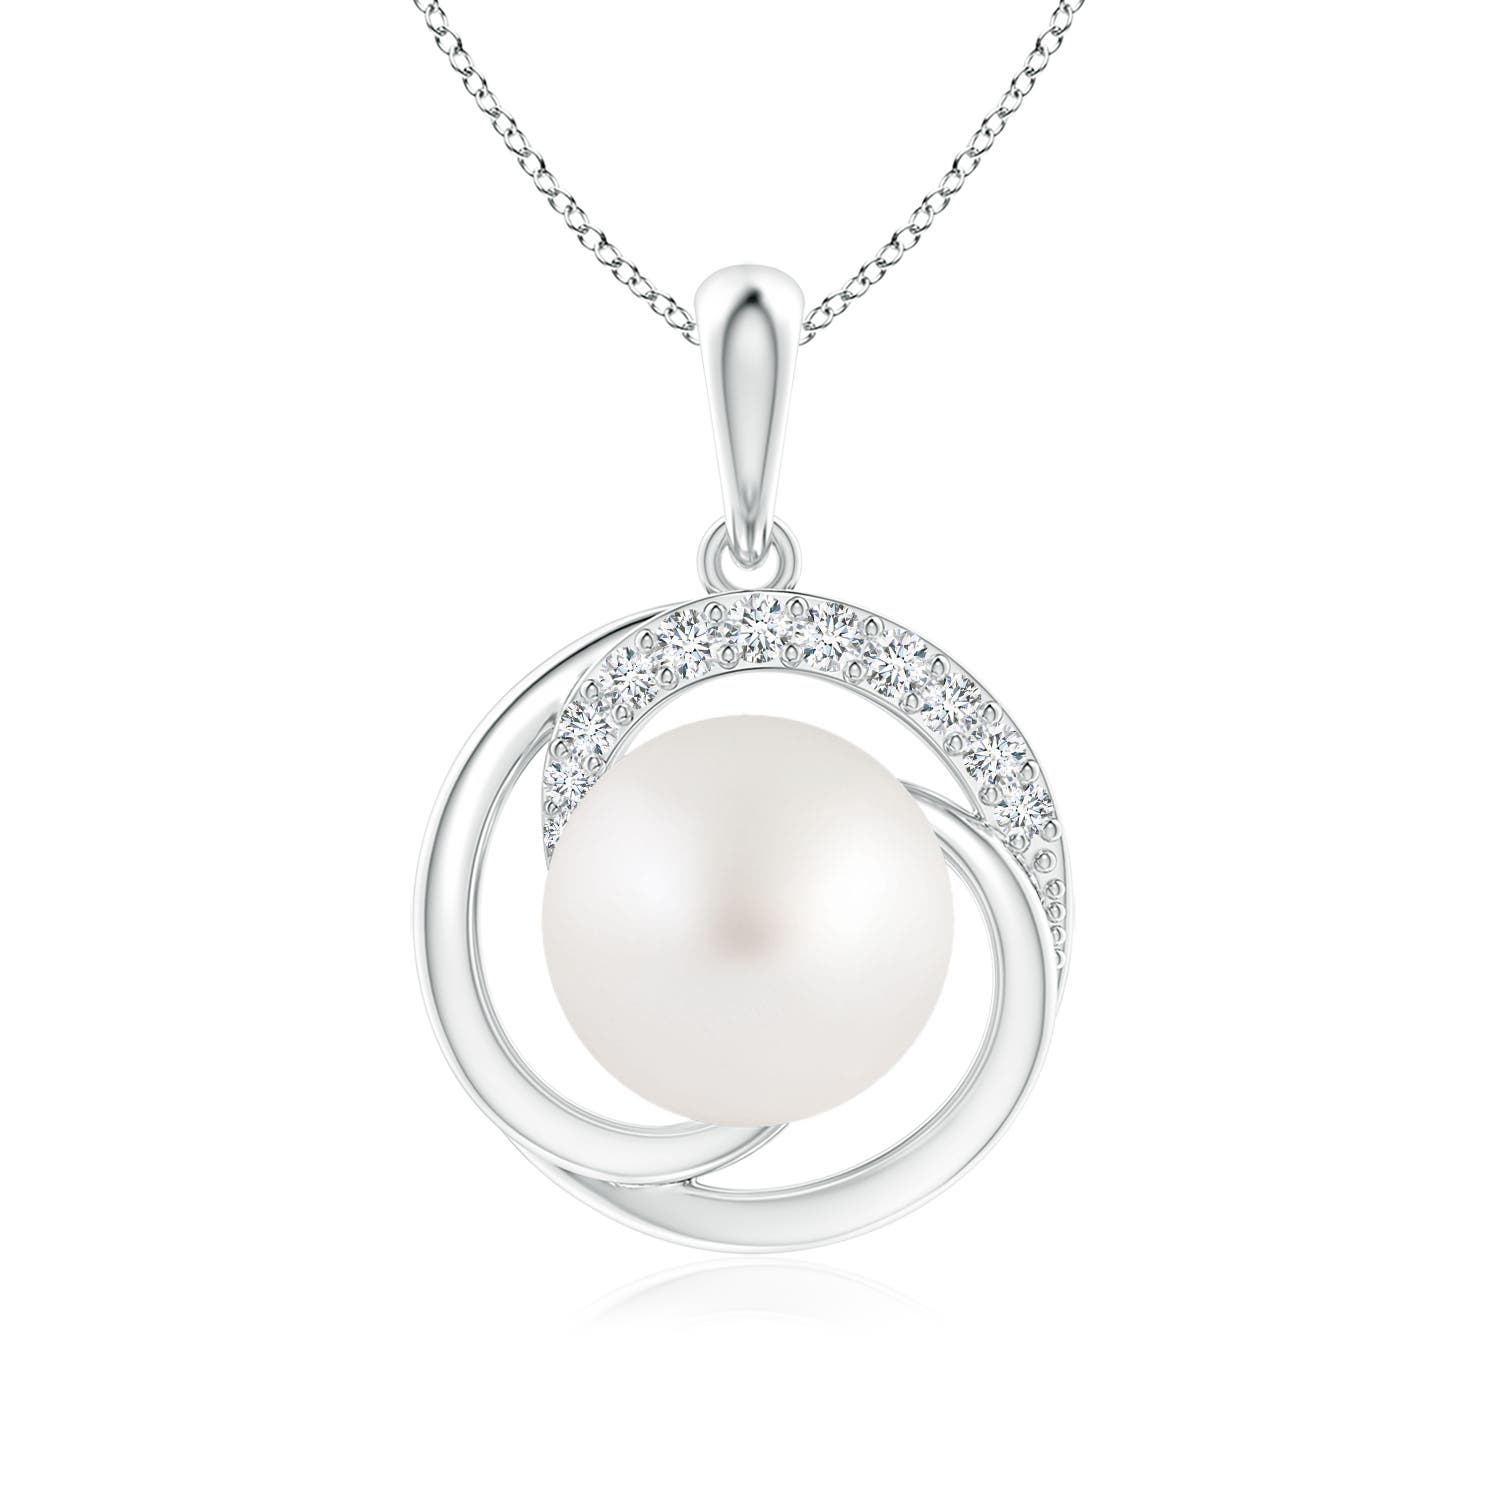 AA - South Sea Cultured Pearl / 5.36 CT / 14 KT White Gold